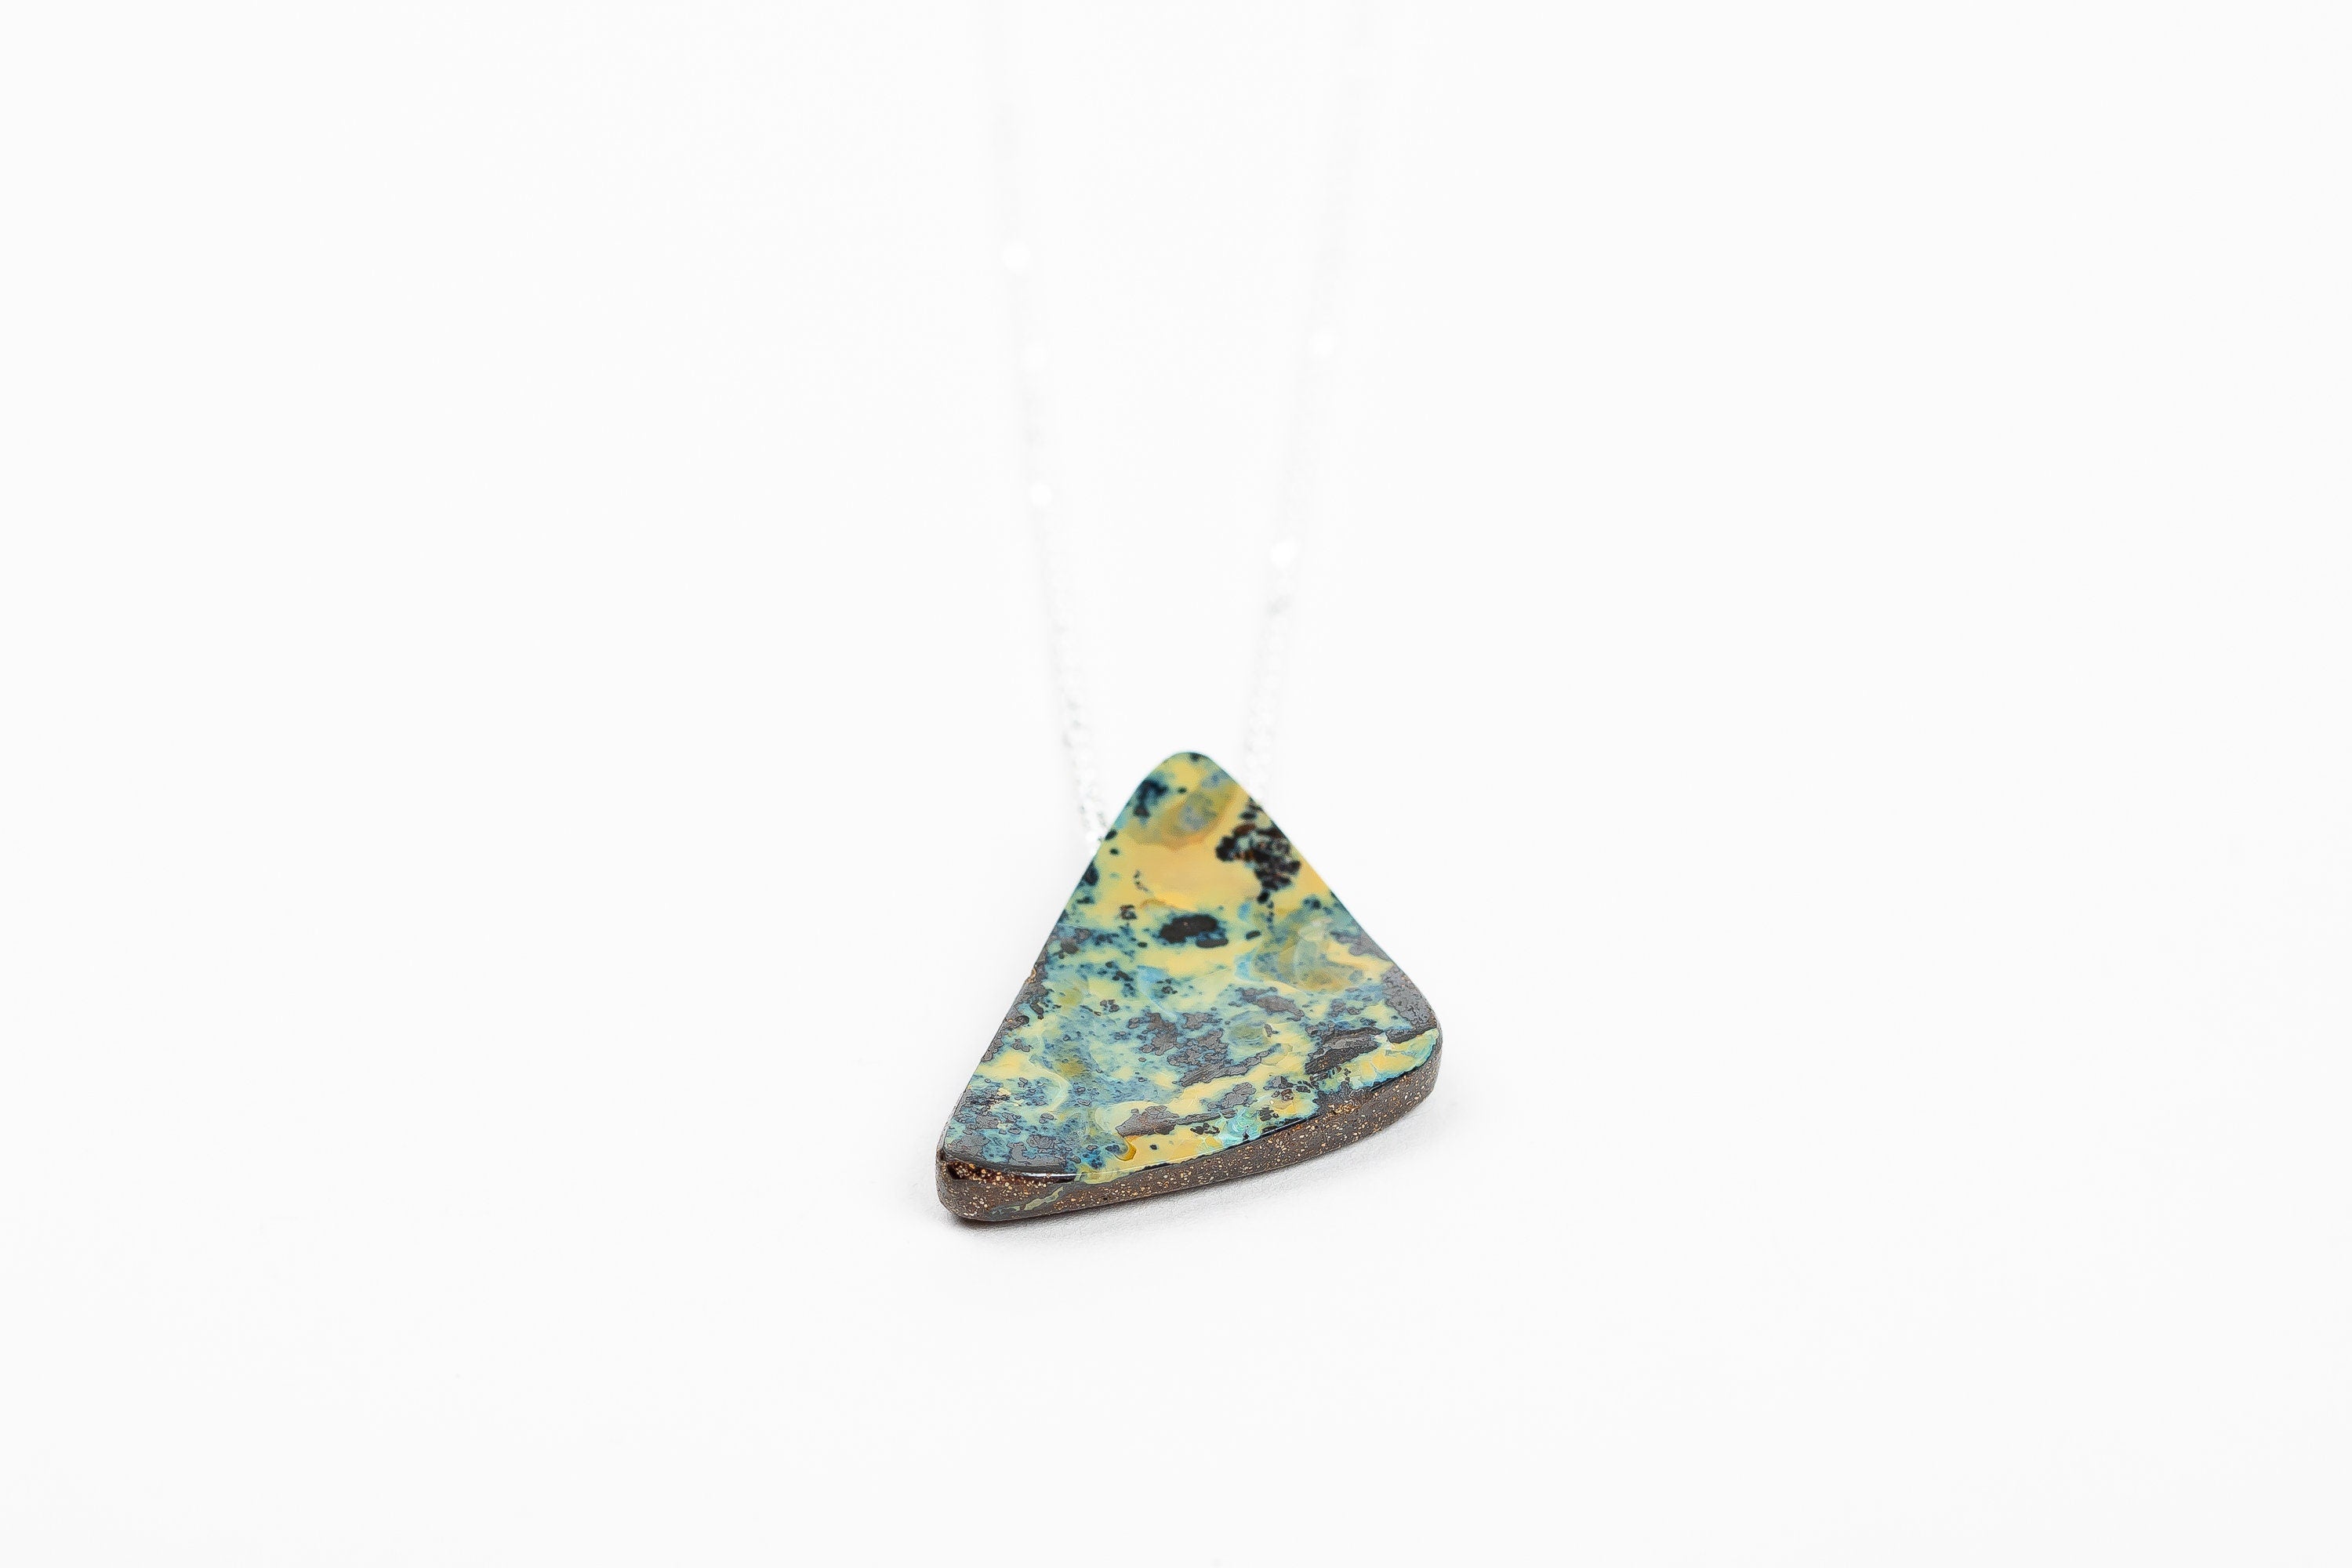 Green And Yellow Boulder Opal Necklace